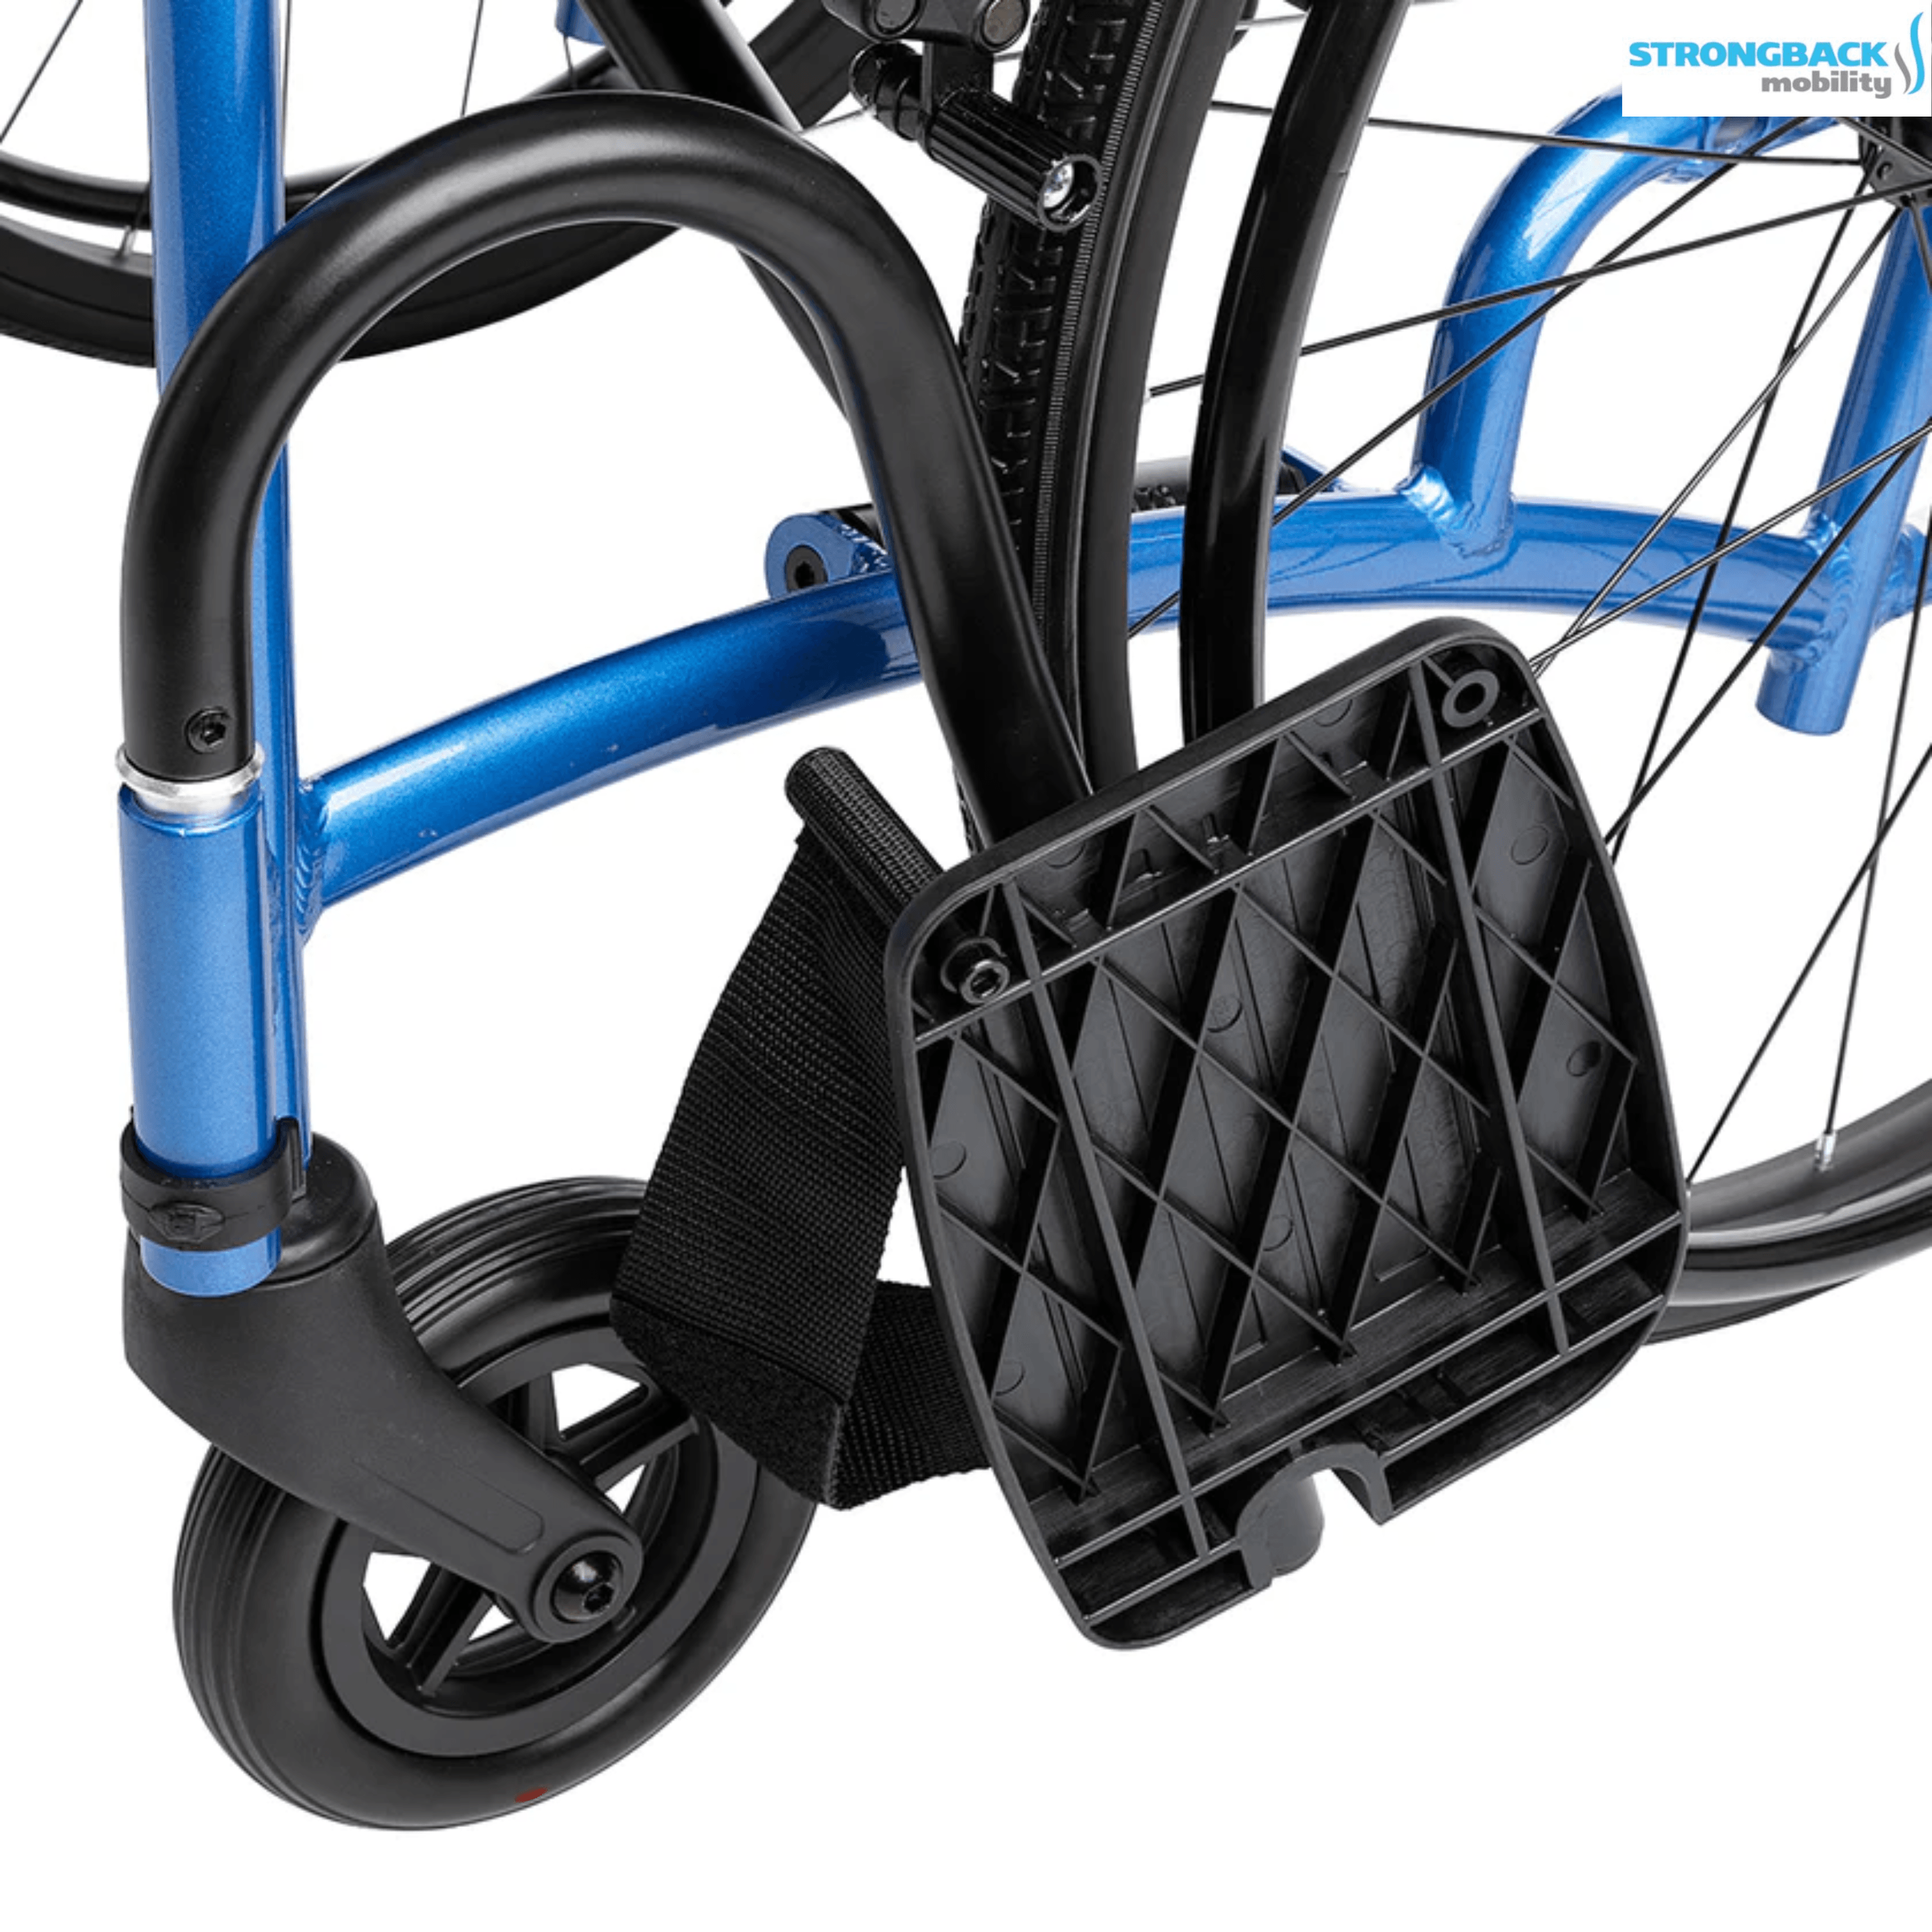 STRONGBACK 12+AB Transport Wheelchair Comfortable and Versatile Strongback